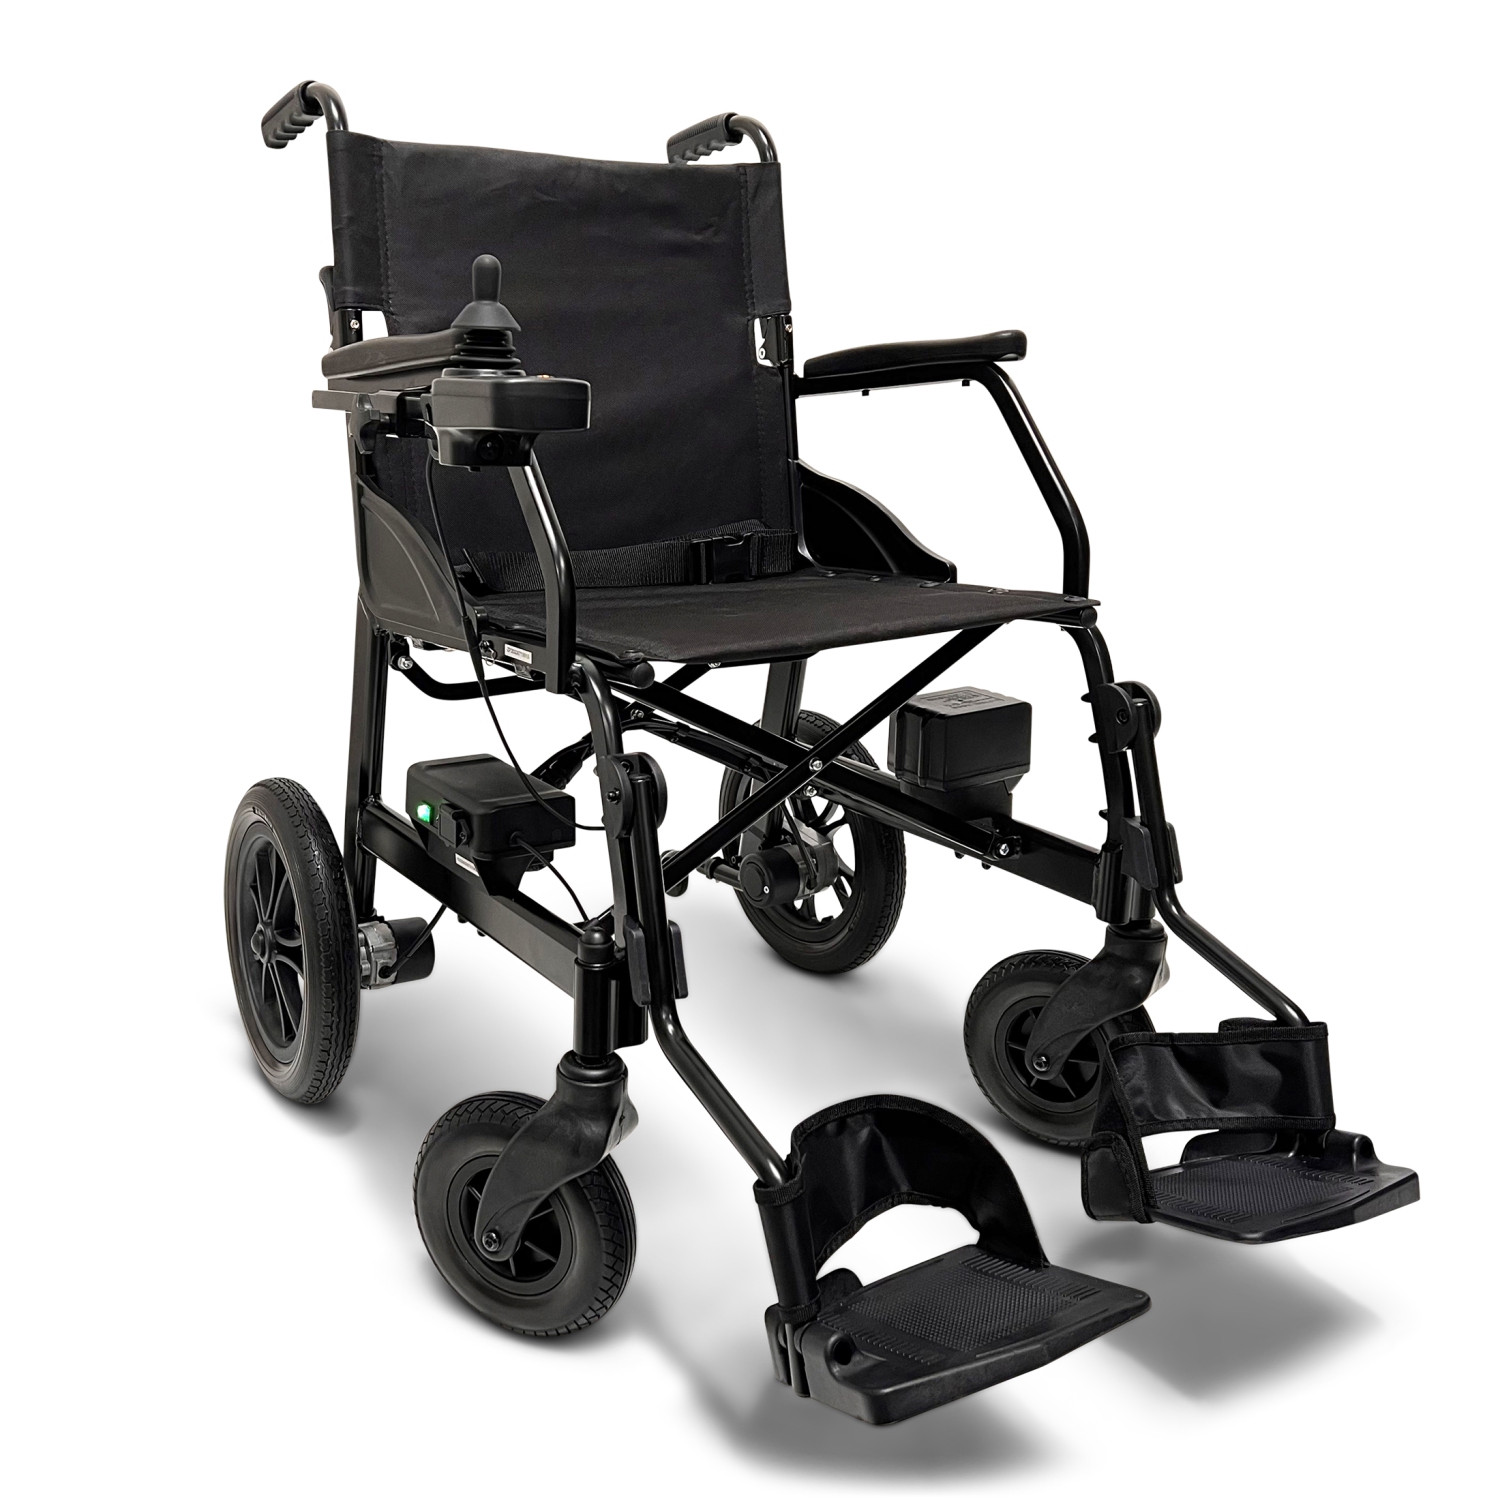 X-lite Ultra Lightweight Foldable Electric Wheelchair | Portable, Travel-Friendly | Dual Motor, 8 km Range | 360° Joystick Control | Airline Approved | Black